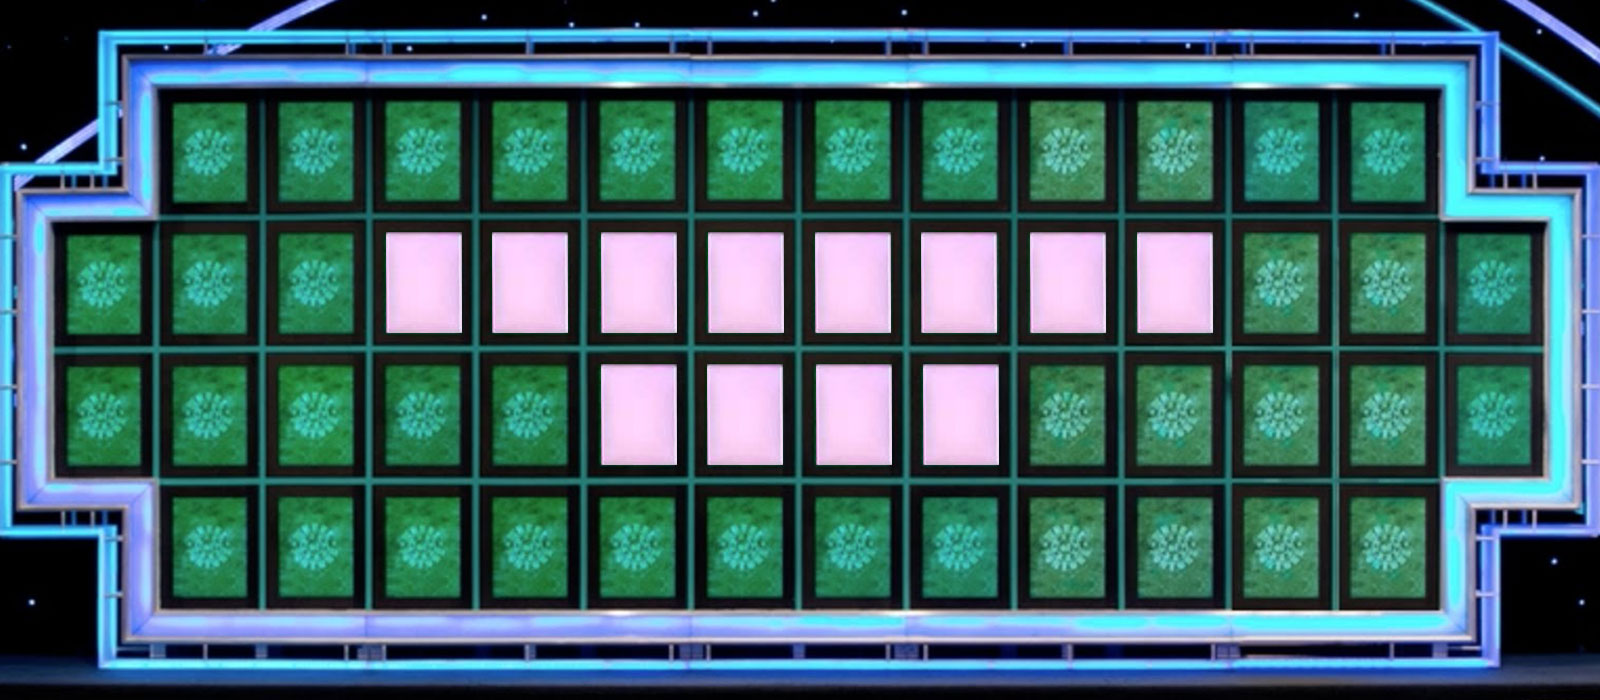 Can You Solve These Wheel of Fortune Puzzles? Quiz 163